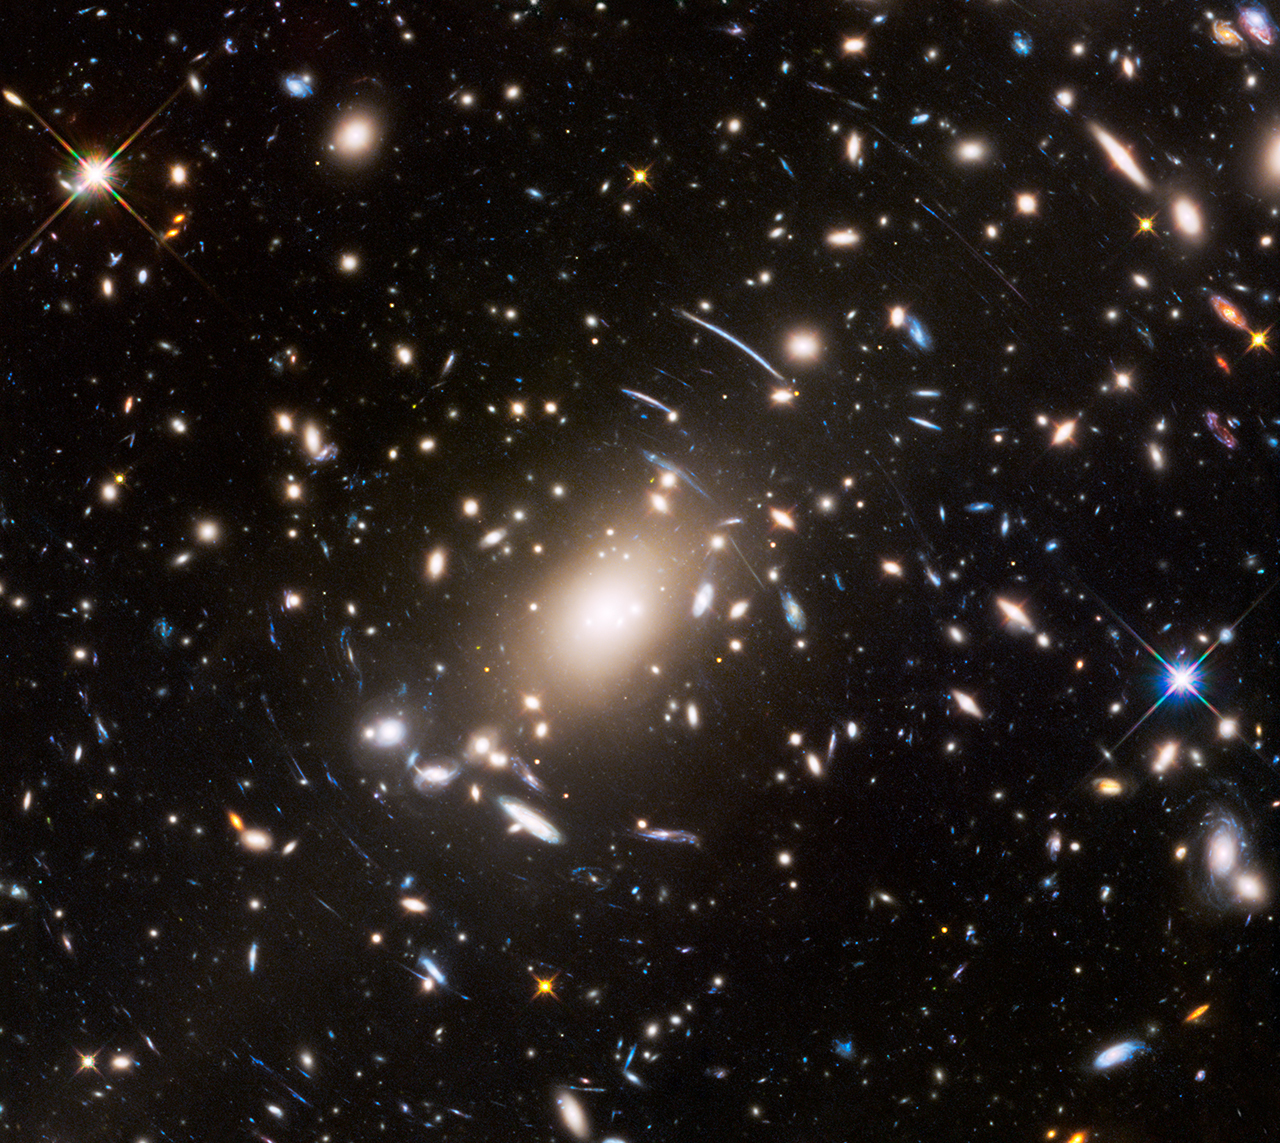 Abell S1063 cluster.